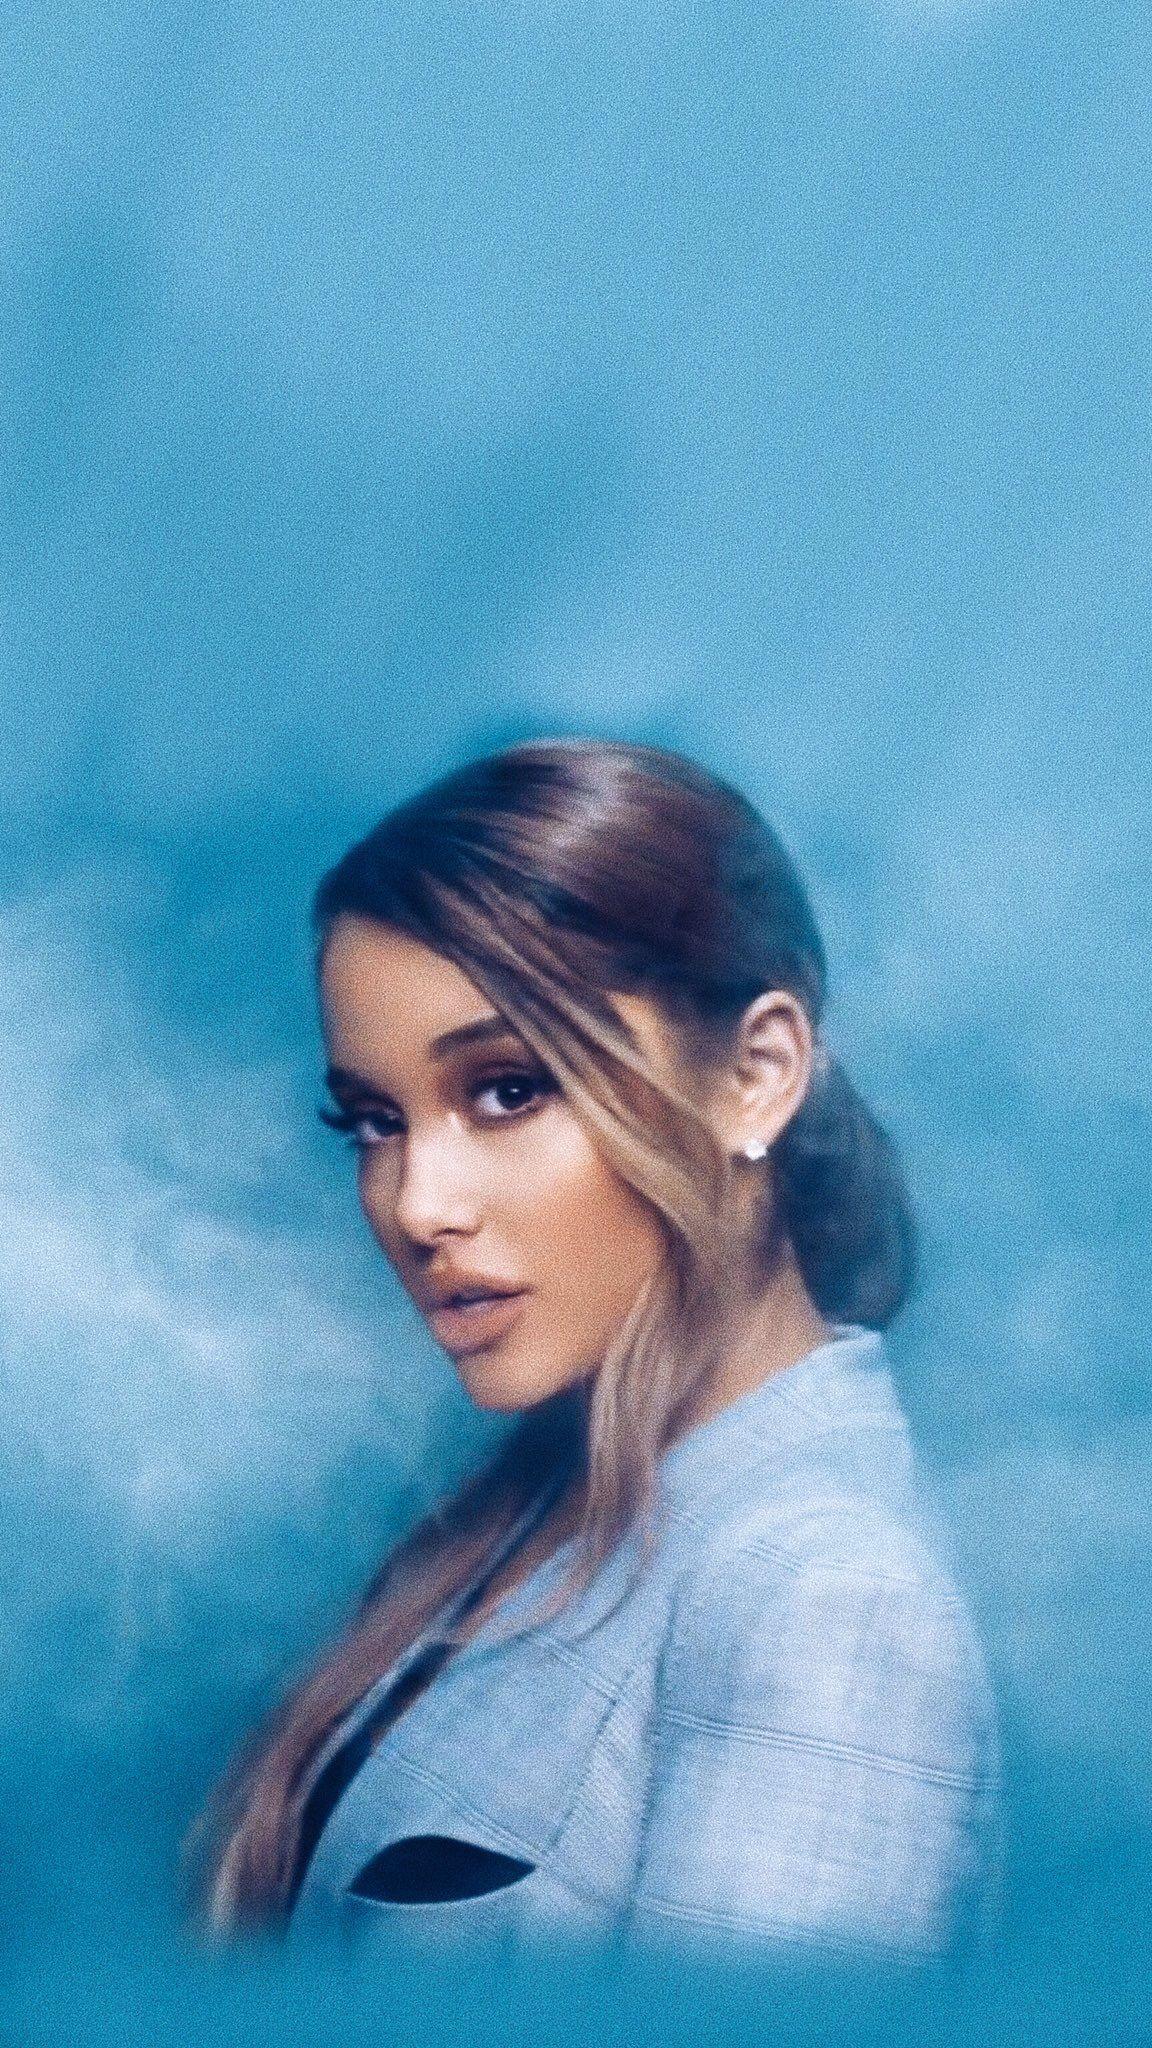 Download Ariana Grande in a vintage-inspired aesthetic setting Wallpaper